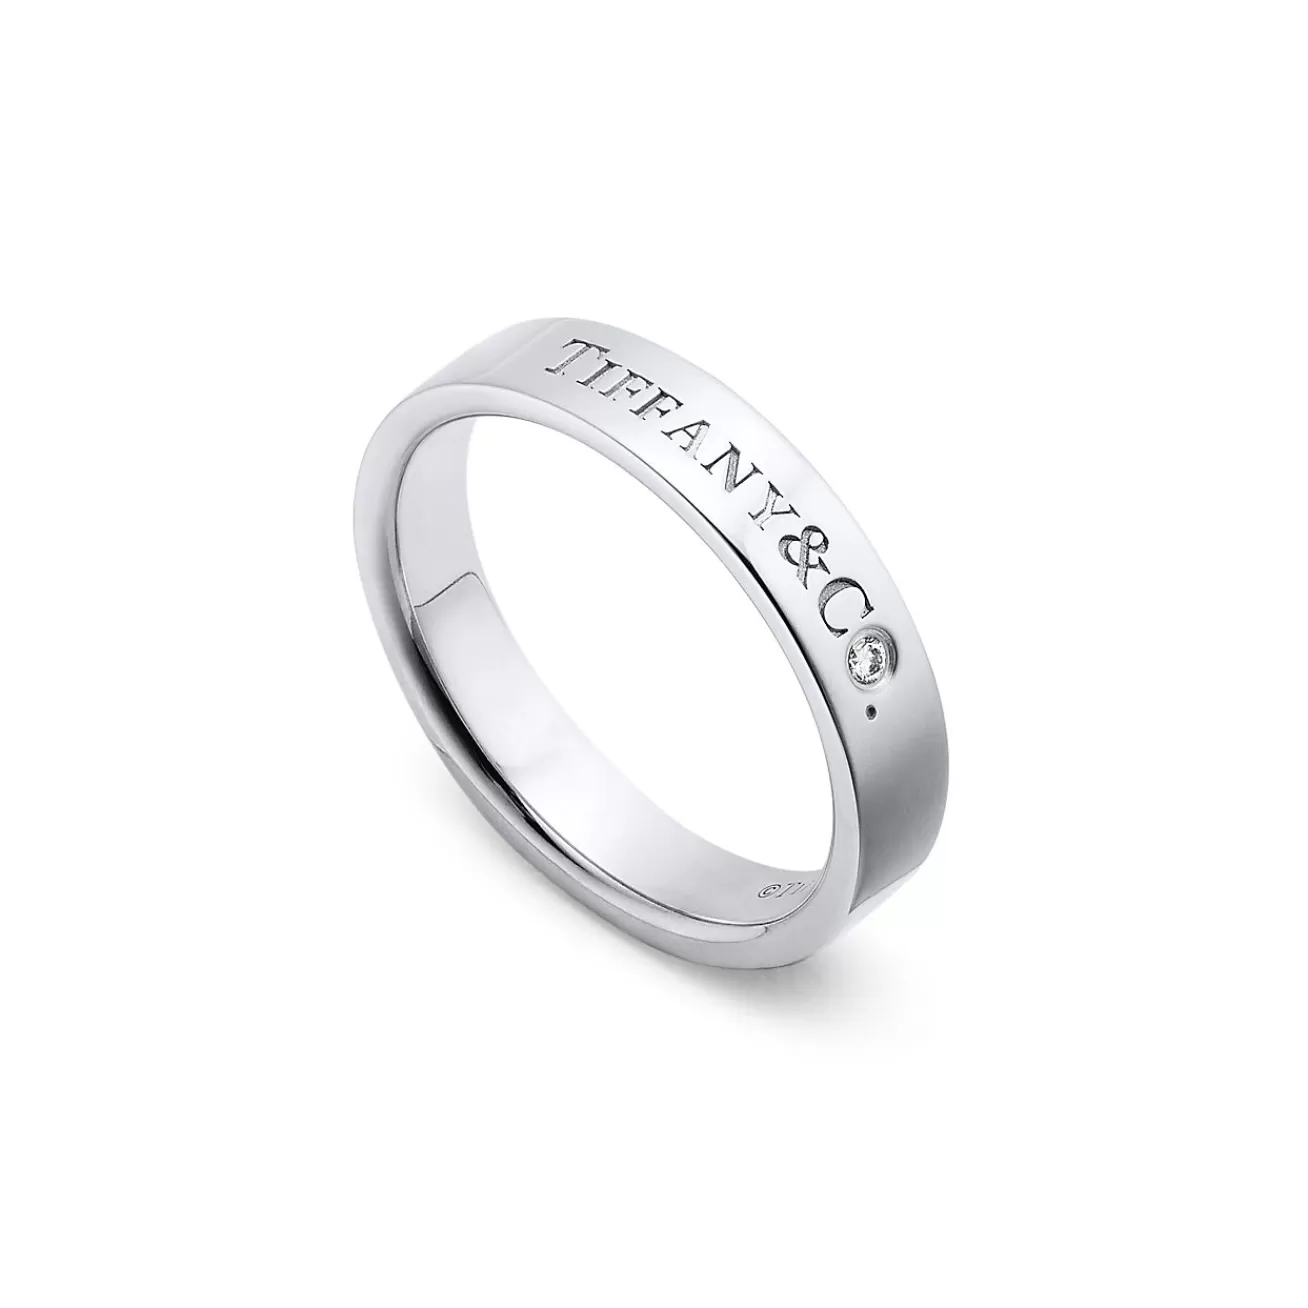 Tiffany & Co. T&CO.® Band Ring in Platinum with a Diamond | ^ Rings | Platinum Jewelry